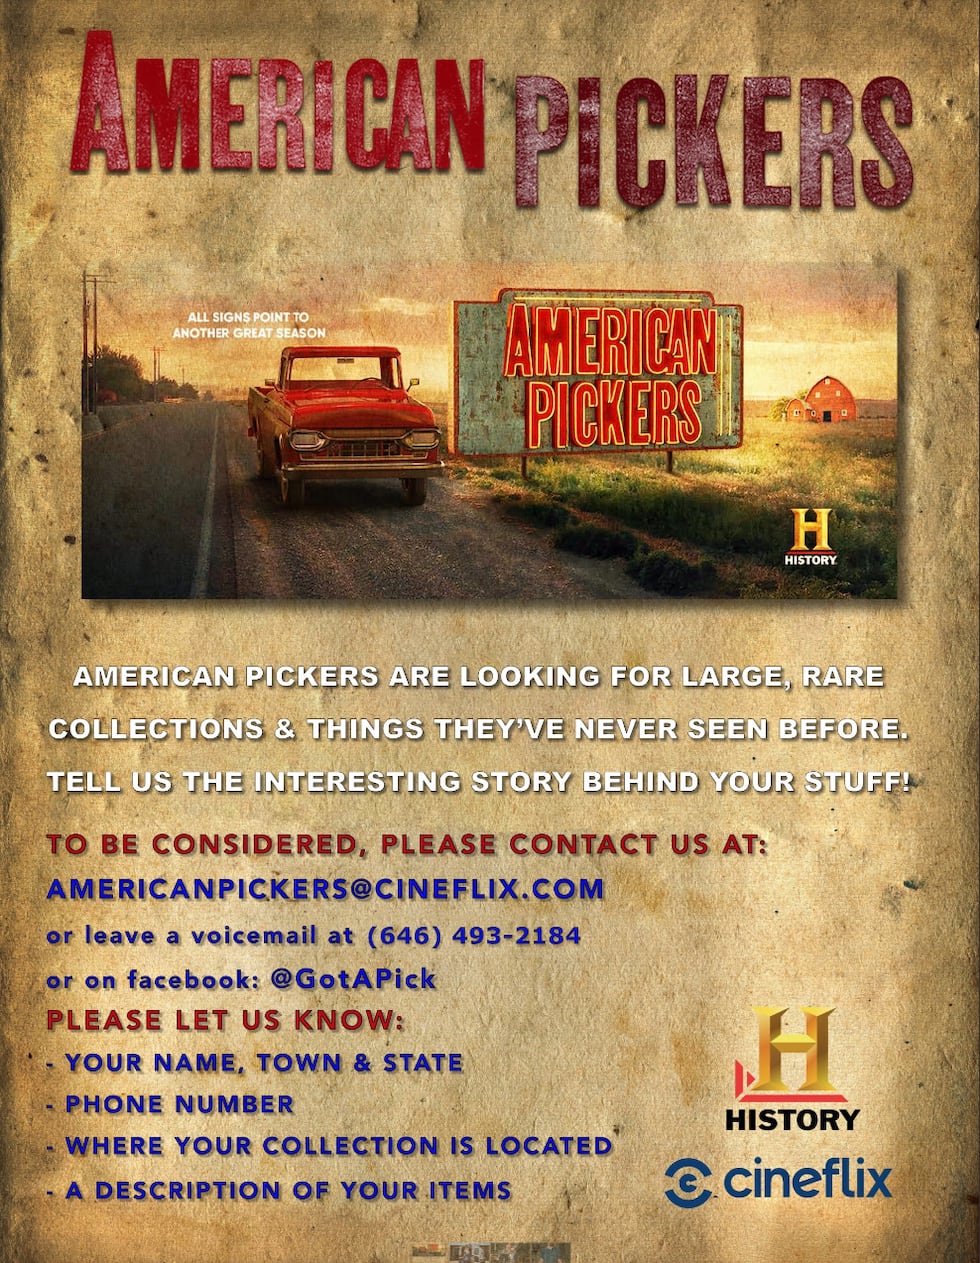 The American Pickers